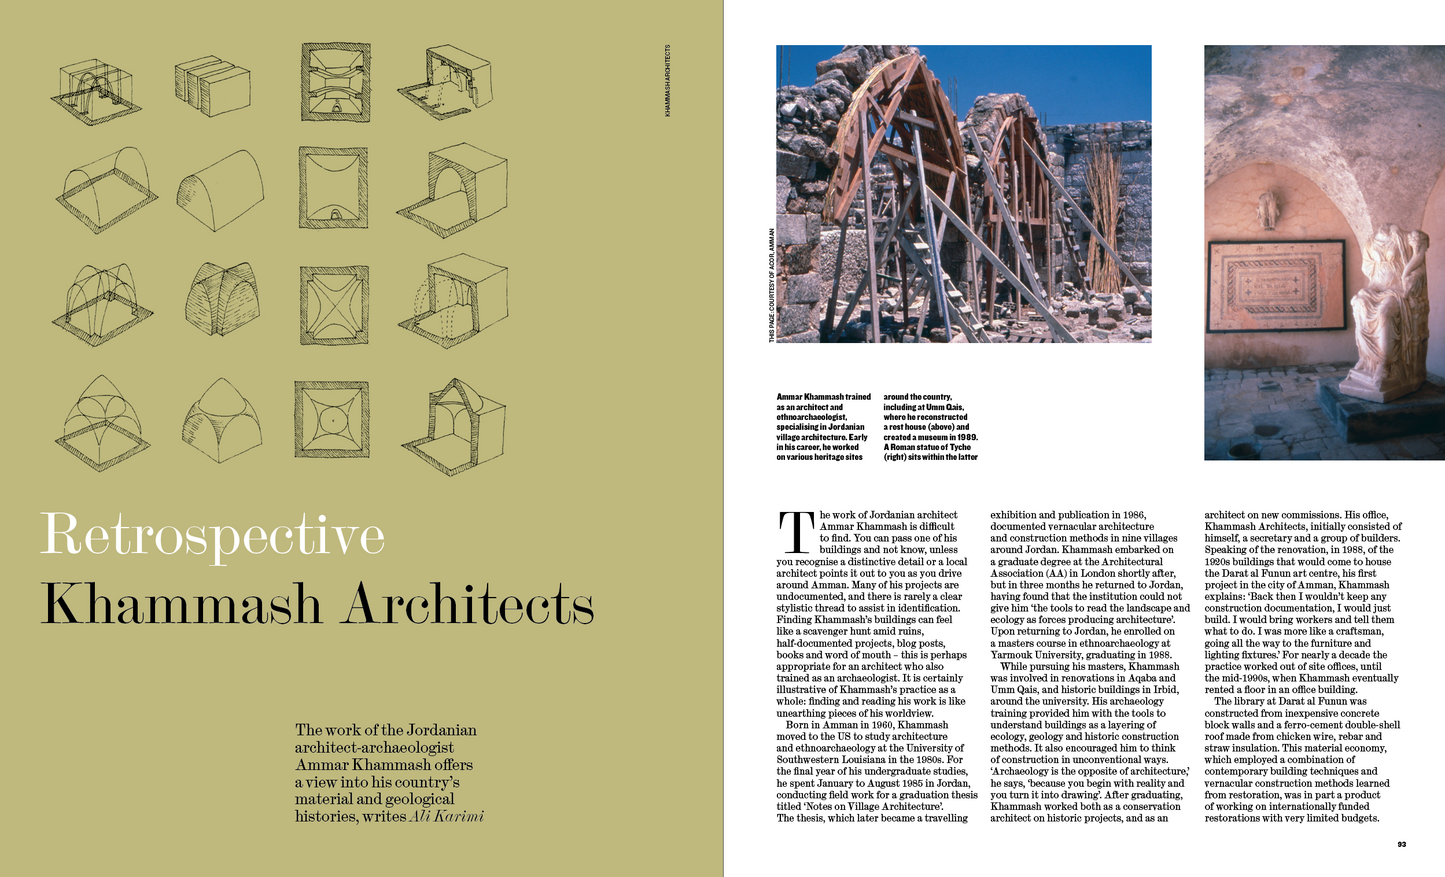 Deserts: The Architectural Review issue 1505, October 2023